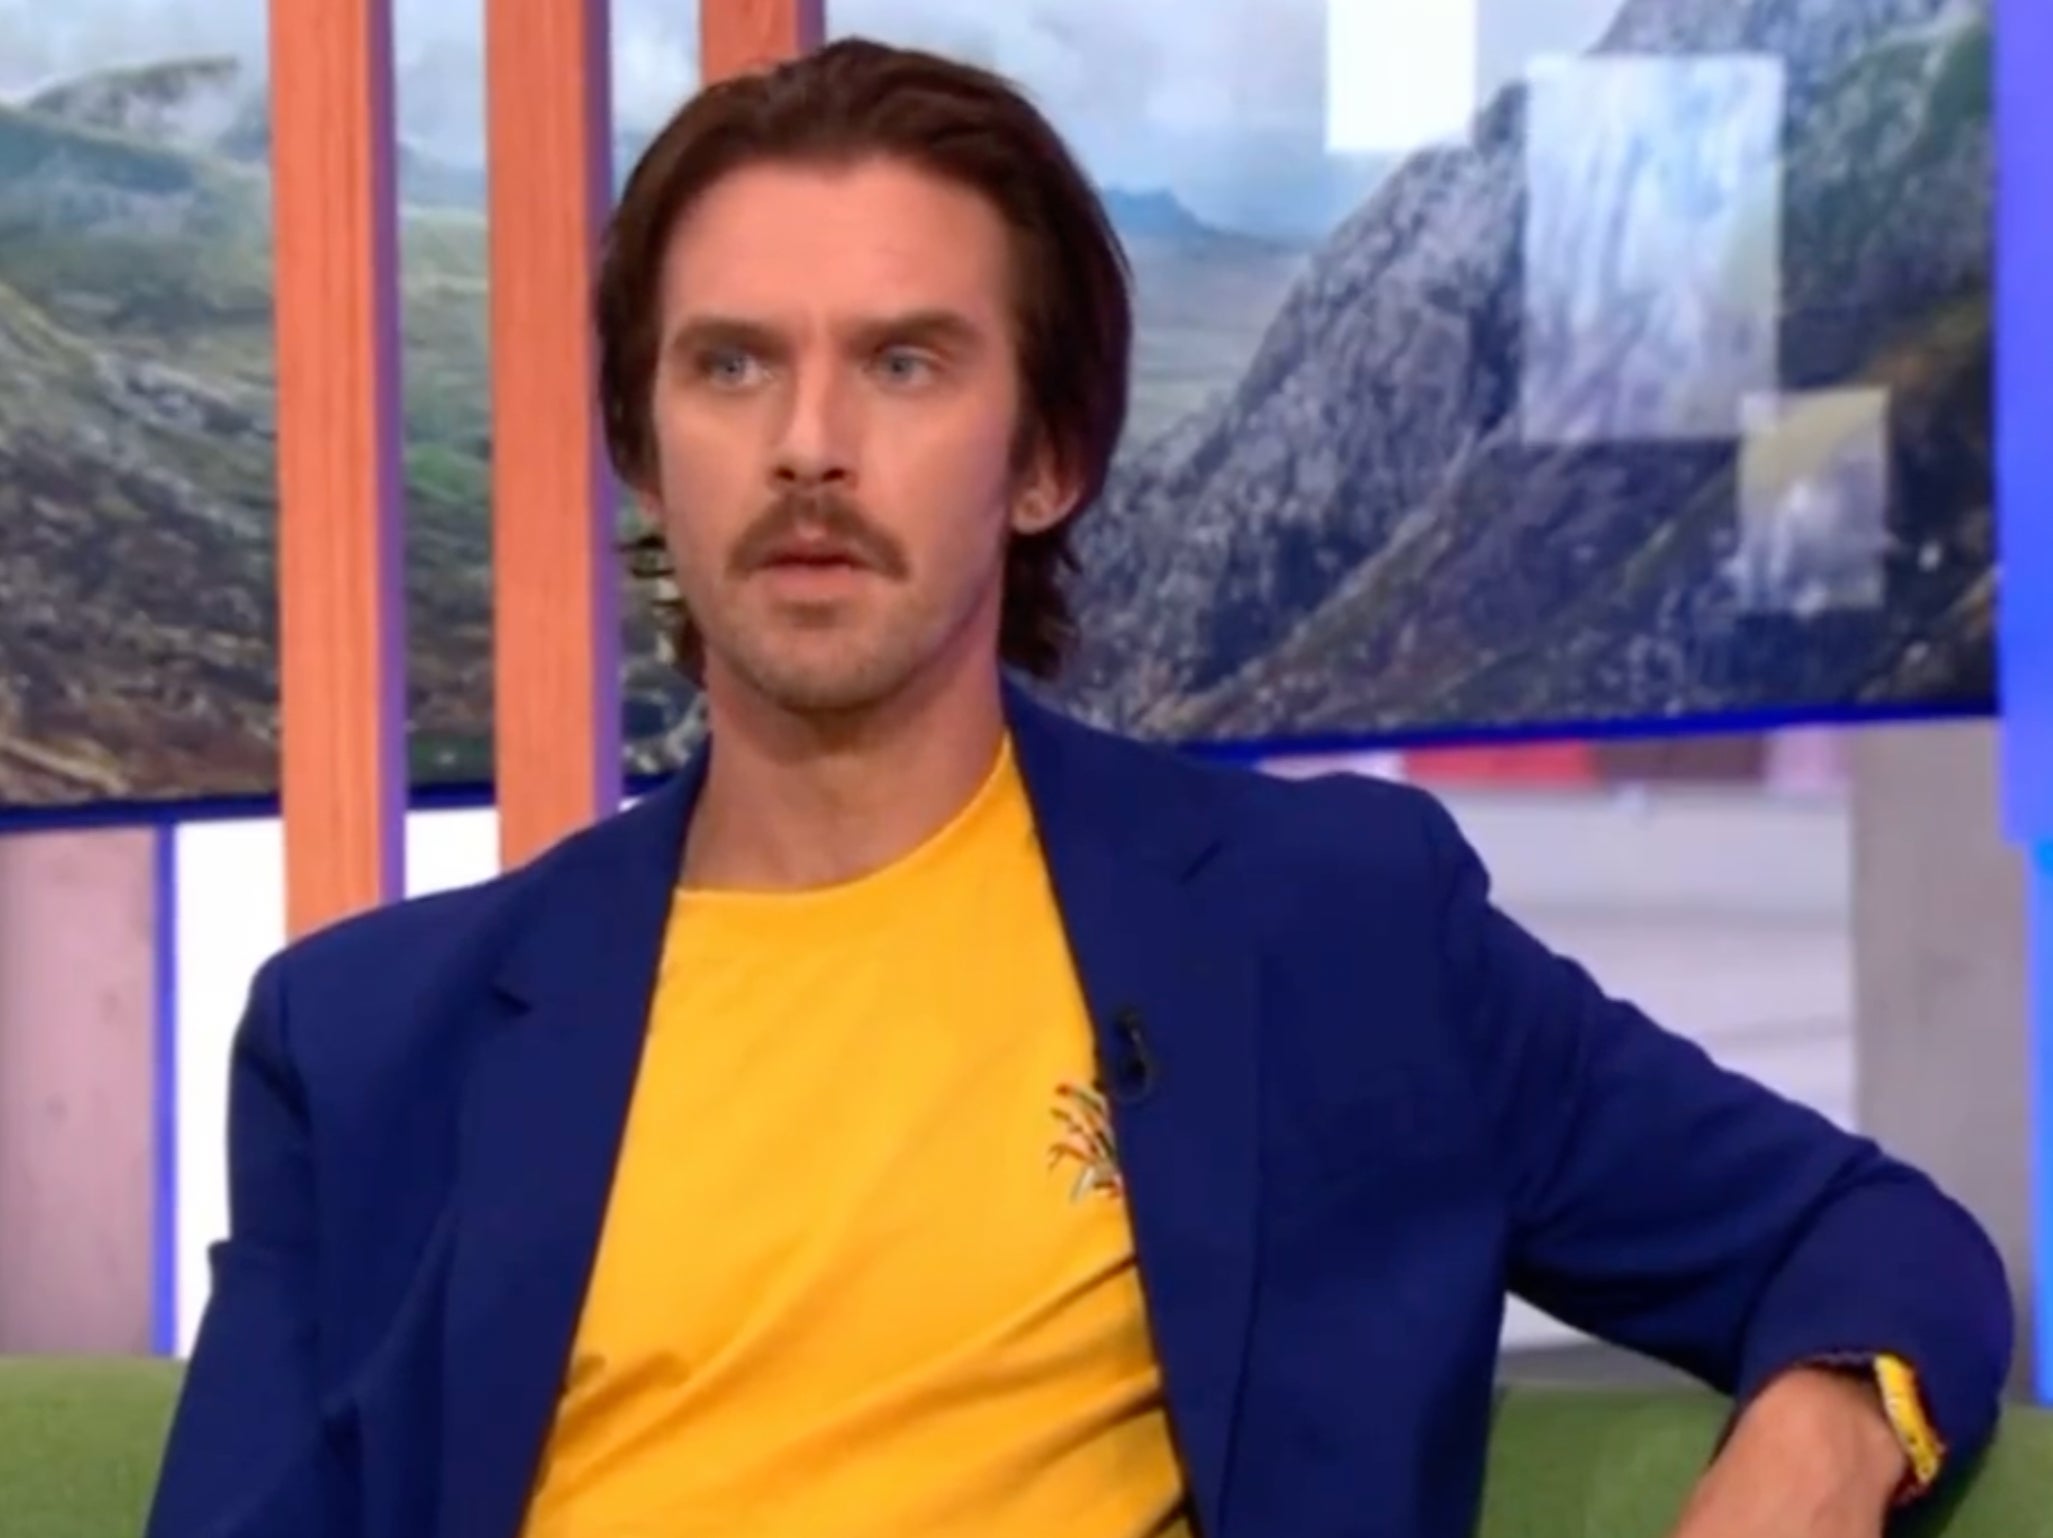 Actor Dan Stevens on the BBC’s One Show